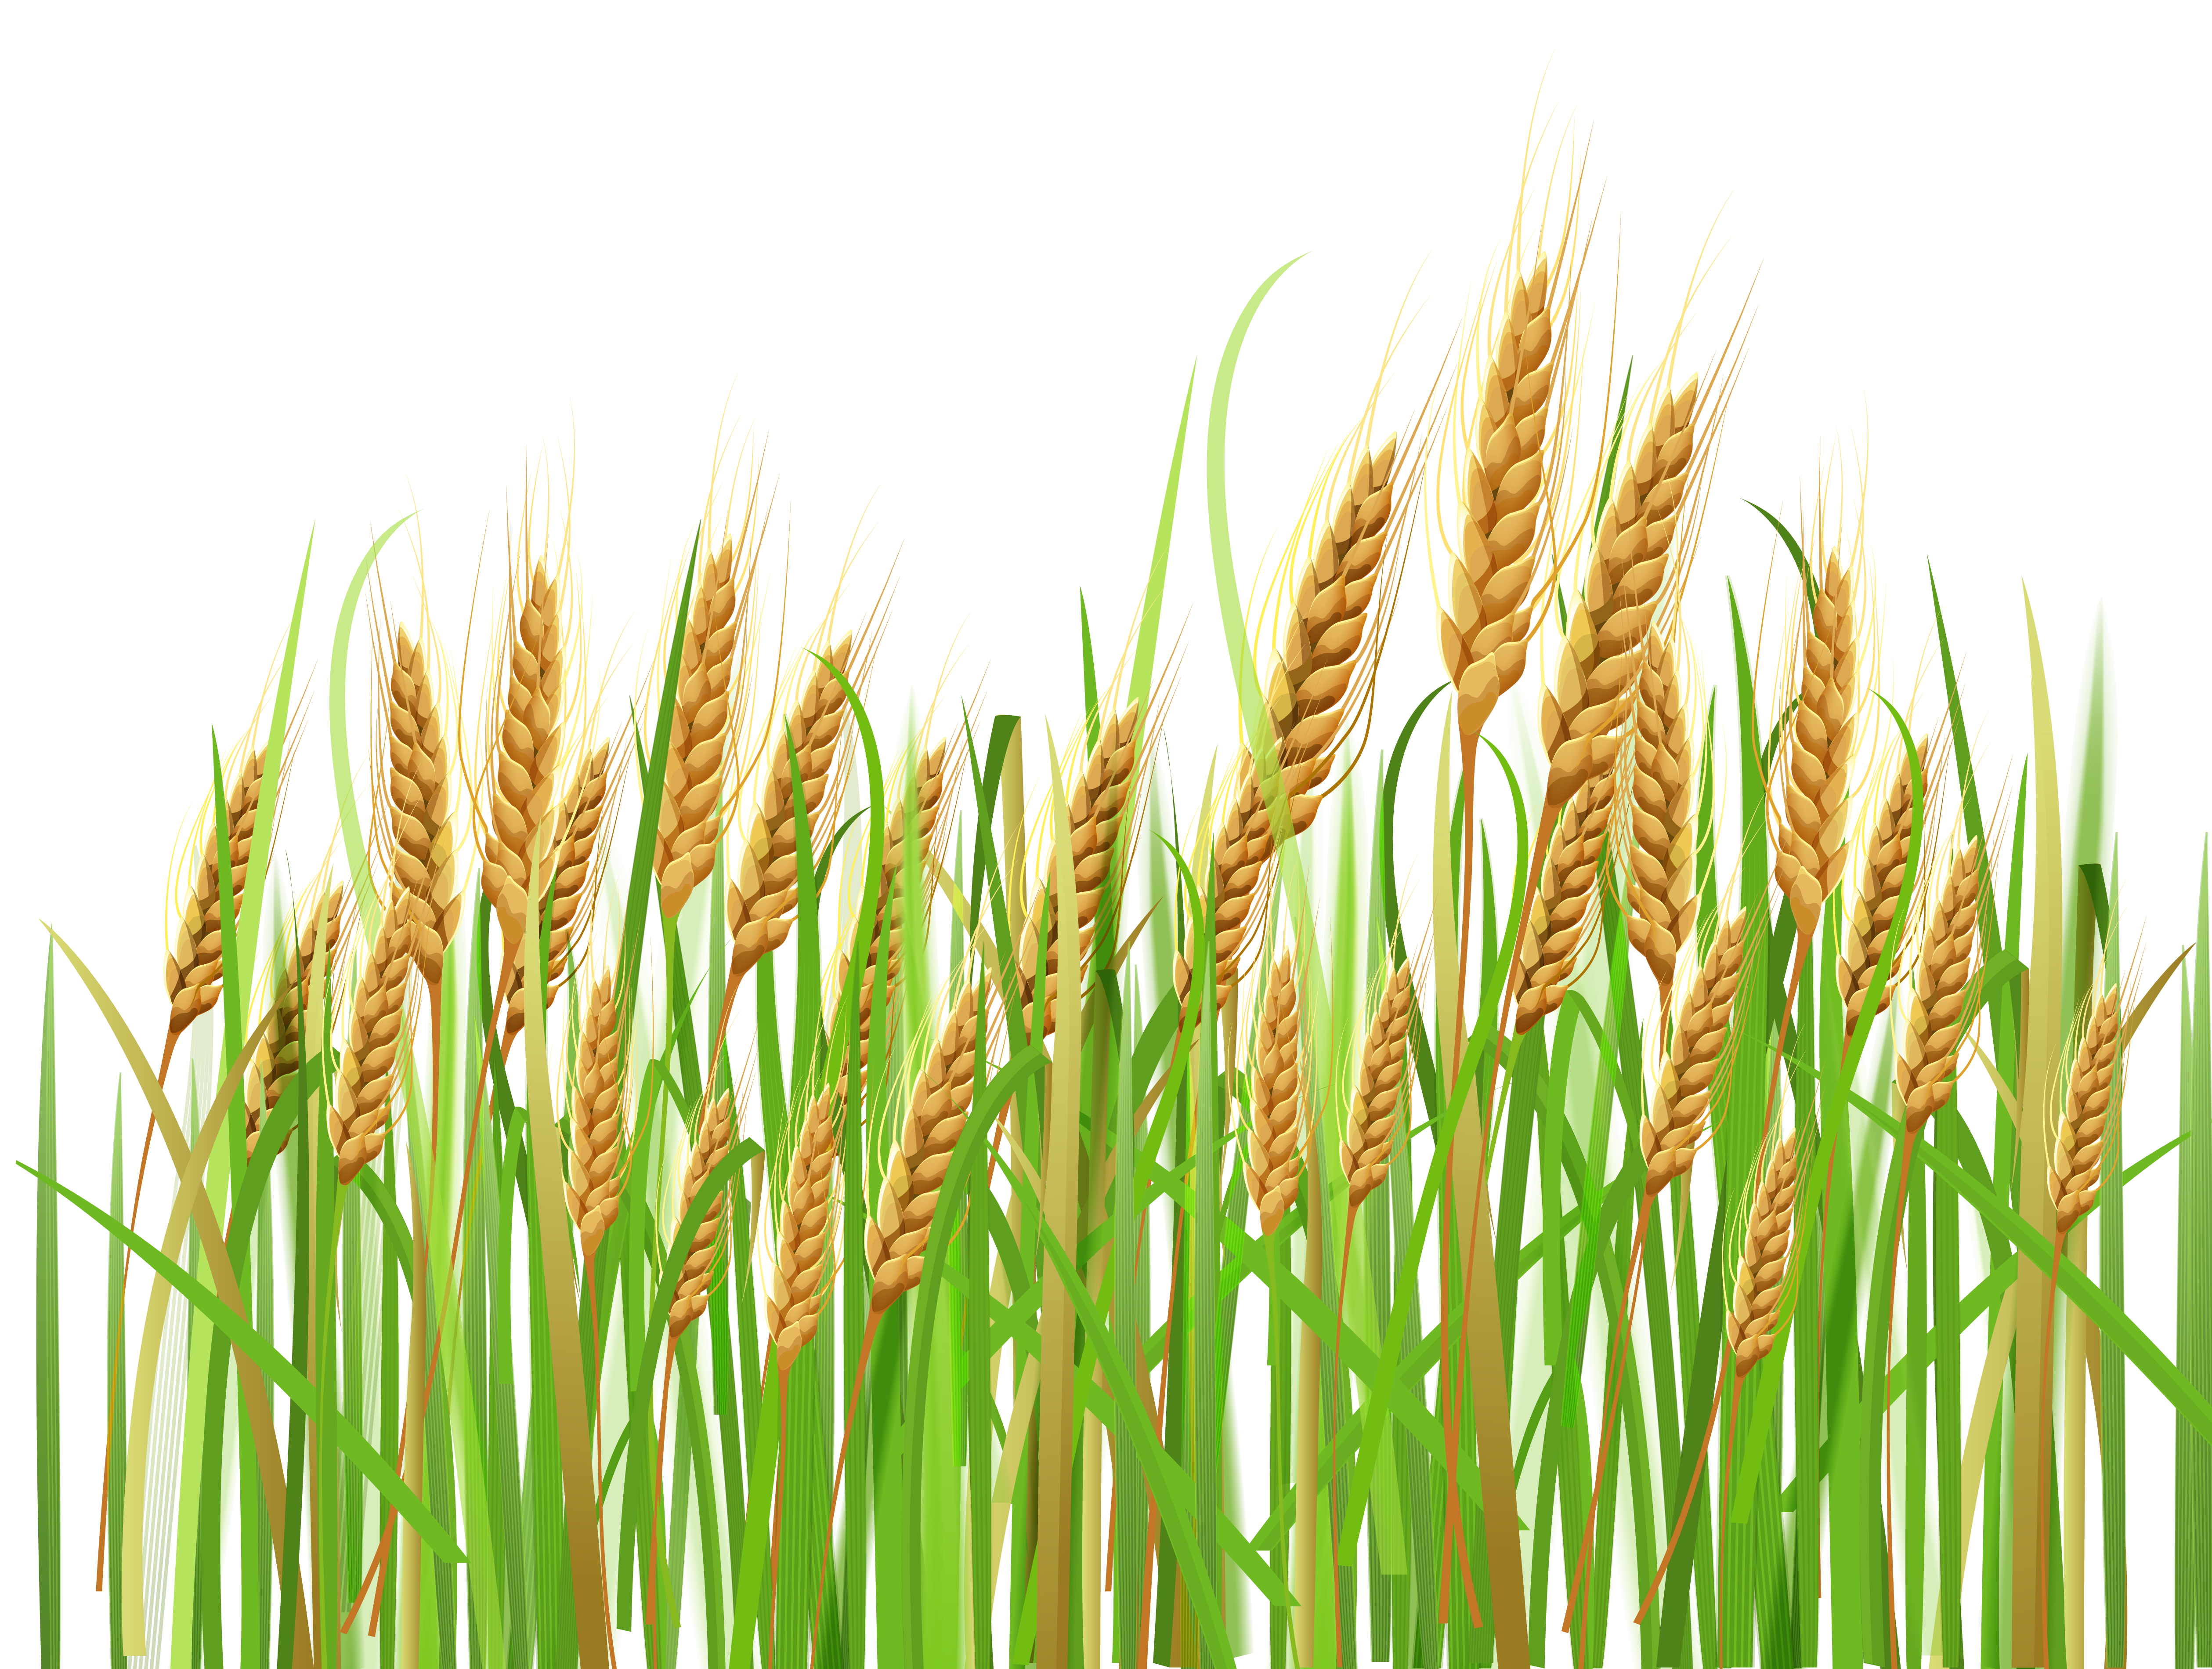 Happy Baisakhi with wheat crop